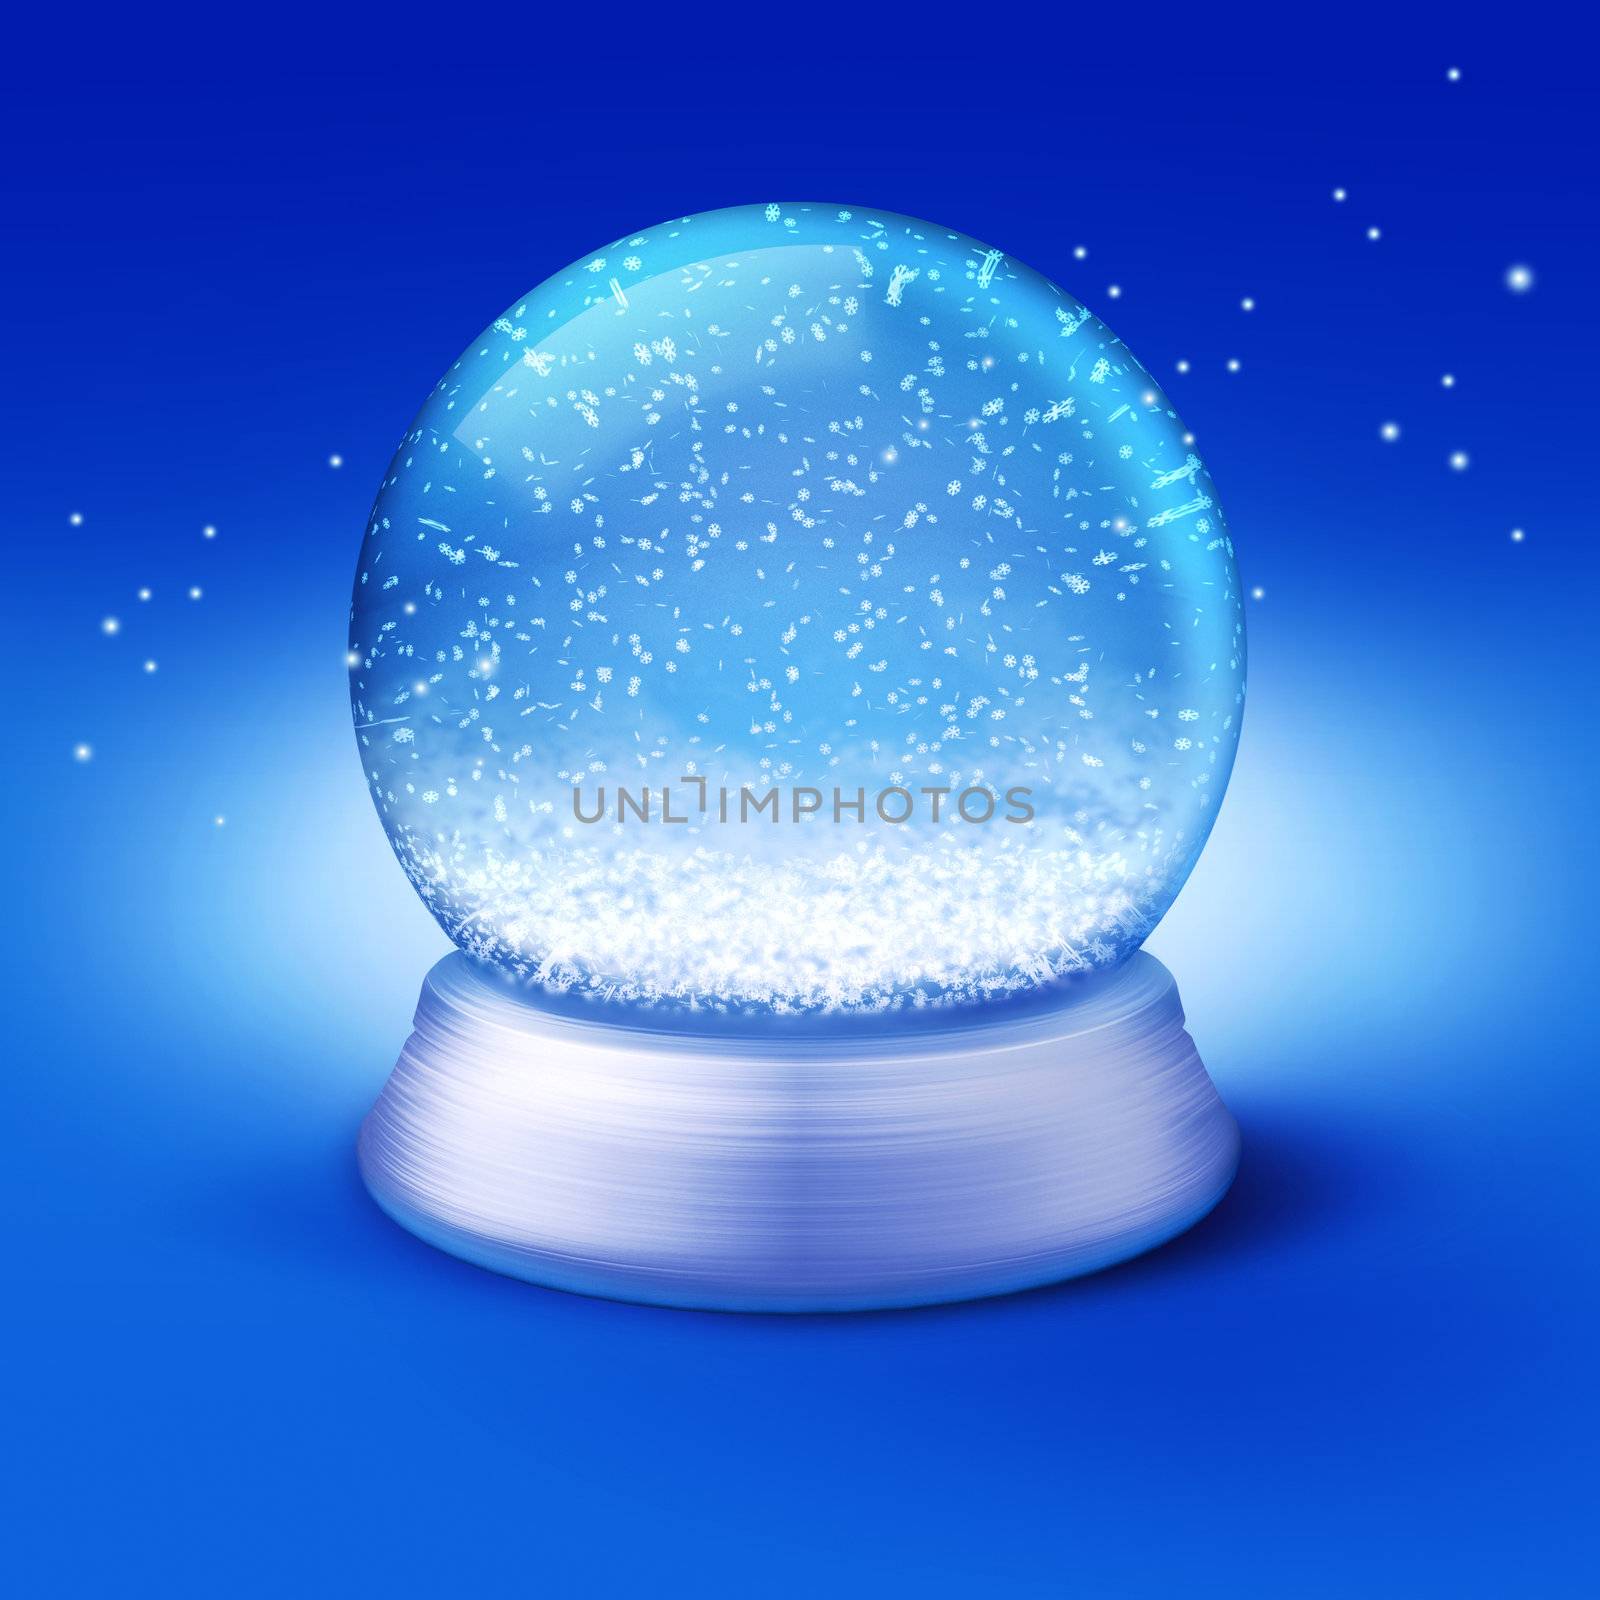 Realistic illustration of an empty snow-dome against a blue background - customize by inserting your own object